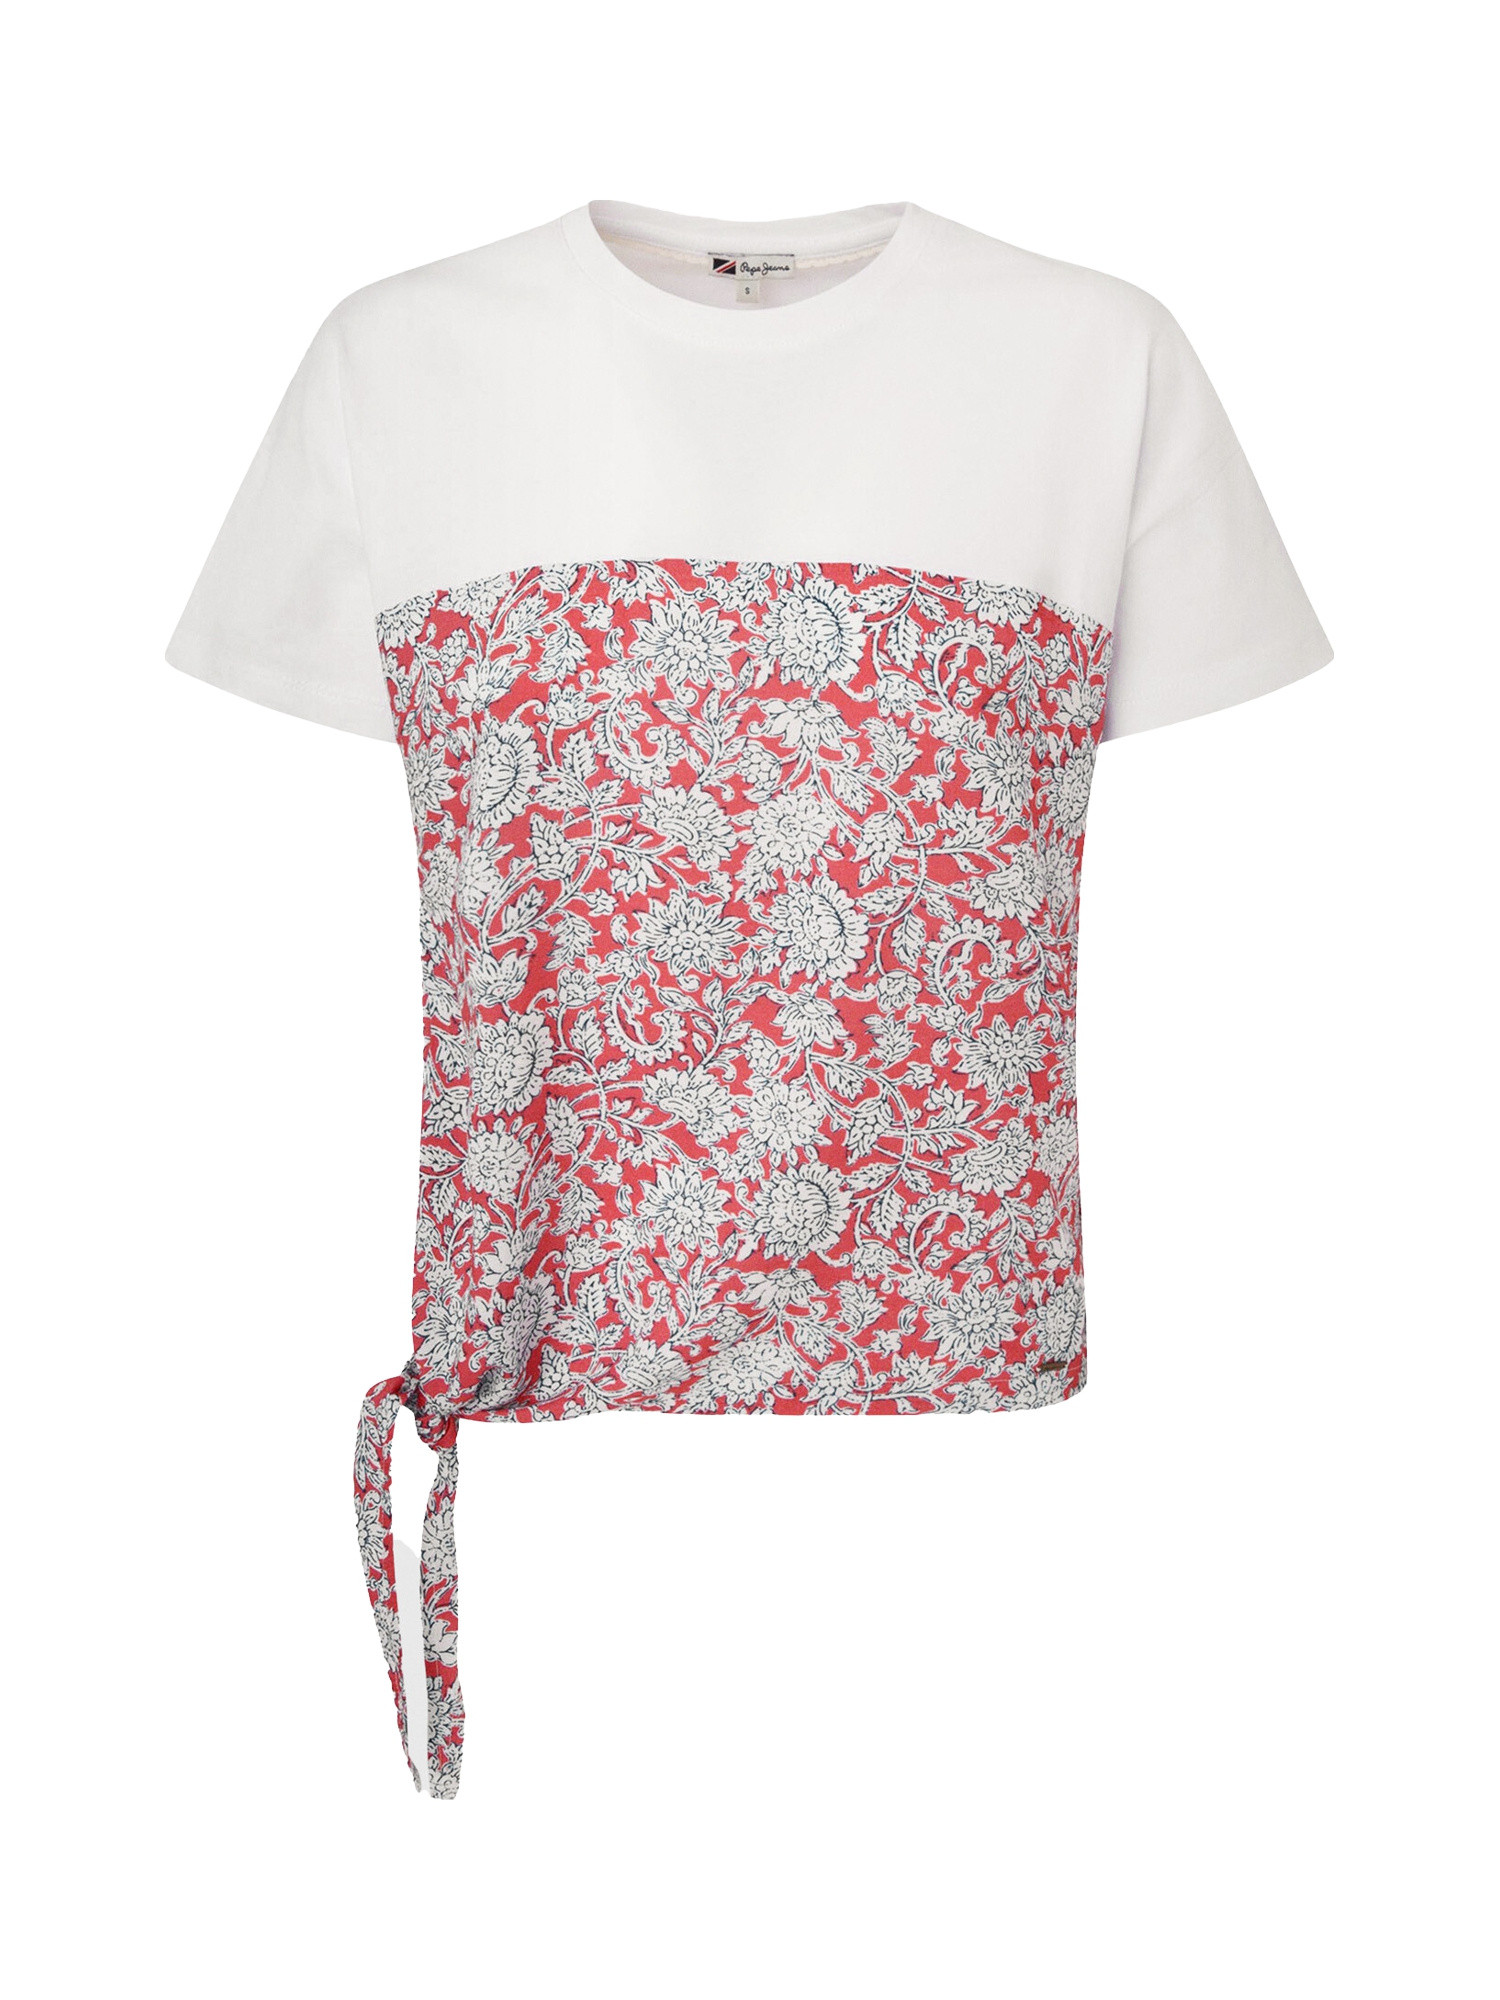 Pepe Jeans - T-shirt a fantasia in cotone, Rosso, large image number 0